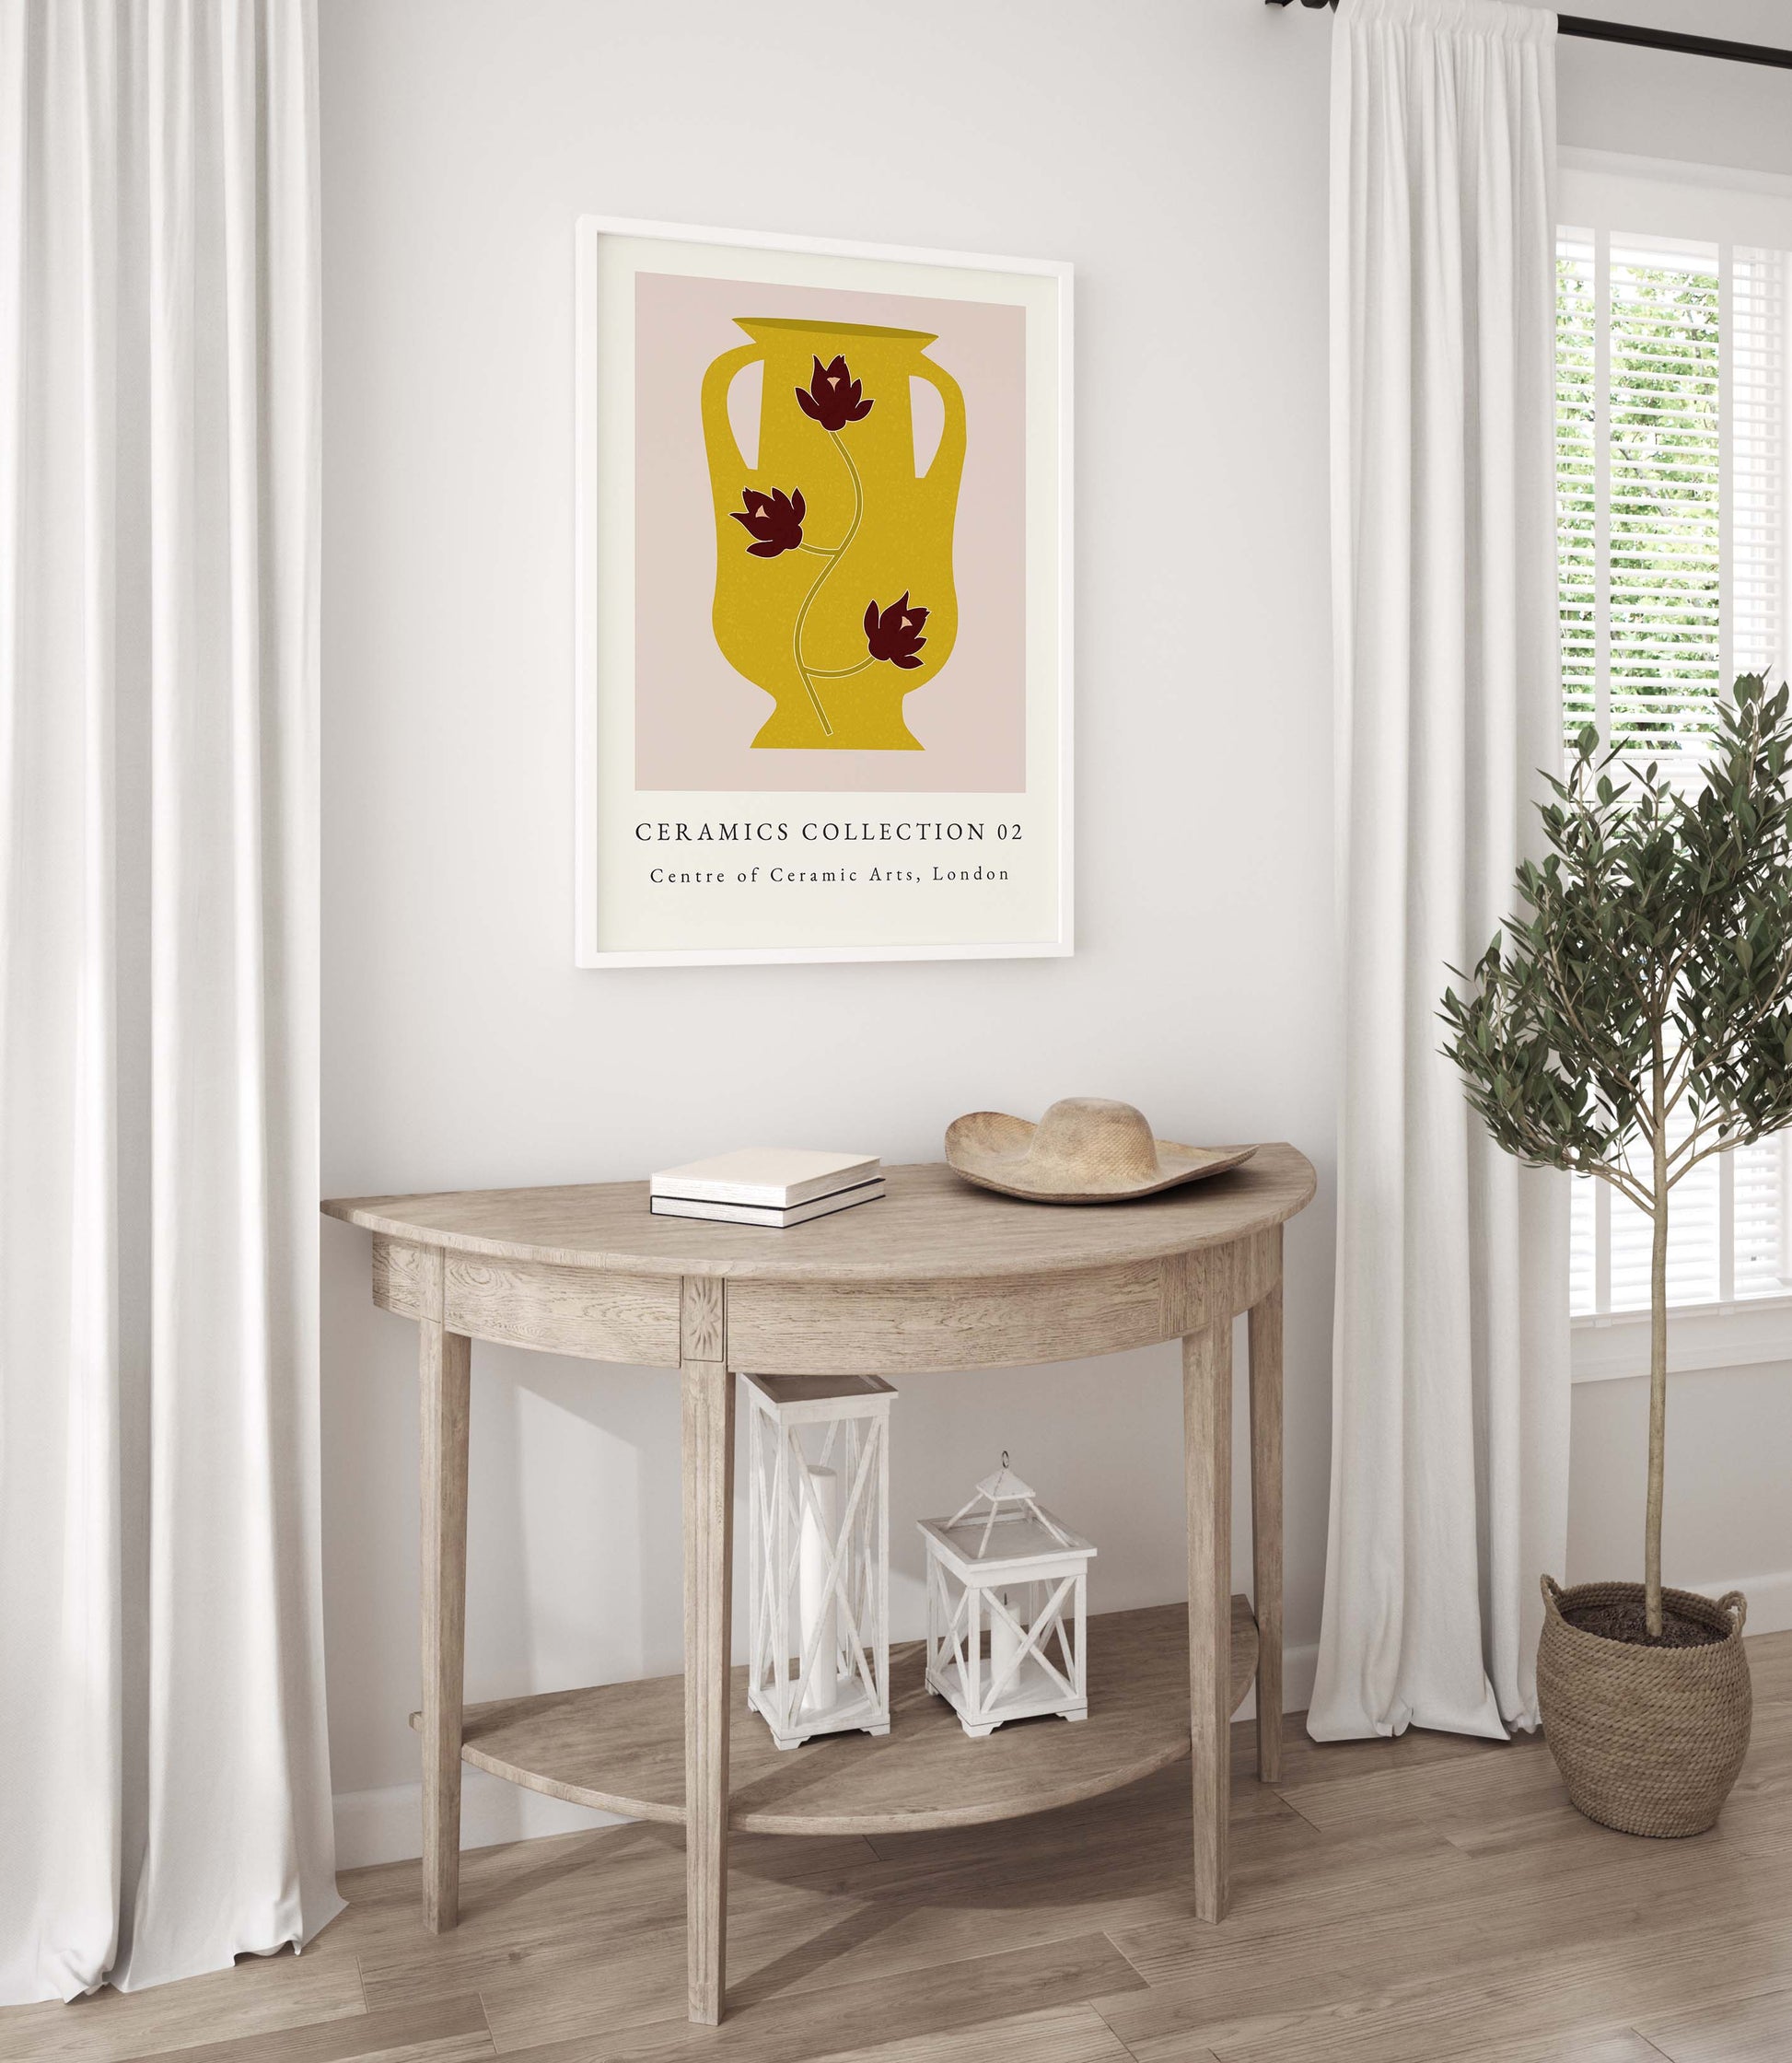 Exhibition print with yellow vase from ceramic collection